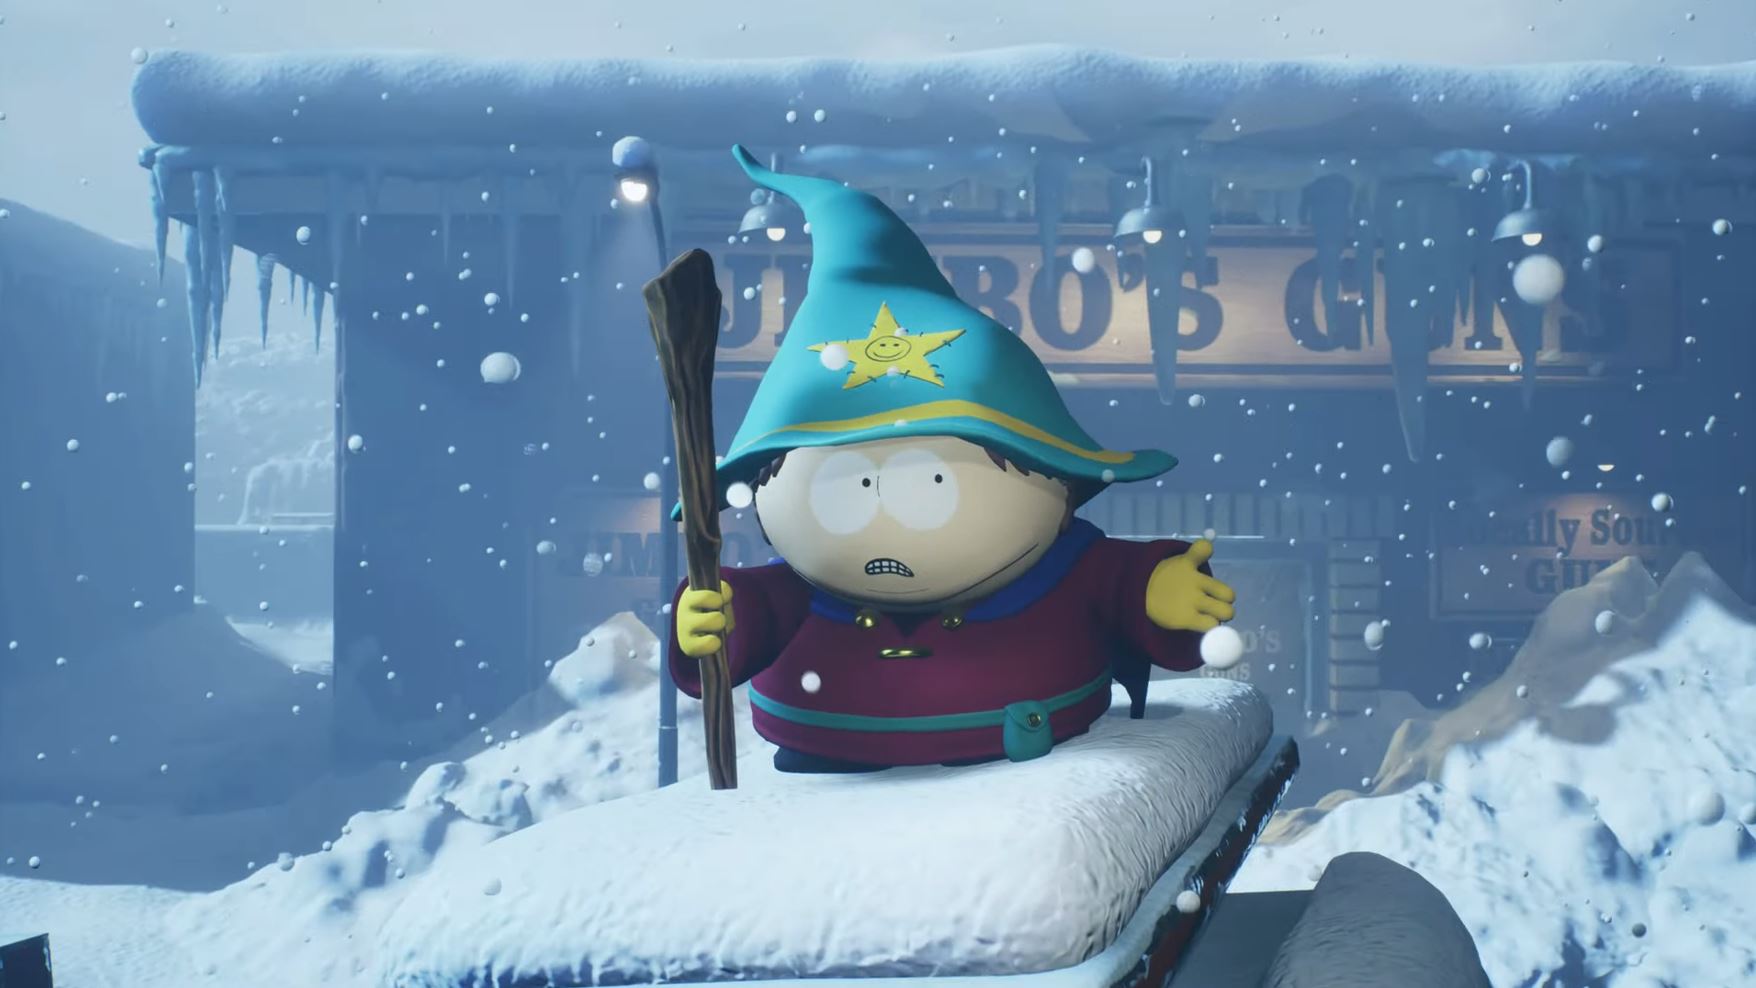 Next South Park Game Should Use The Streaming Wars as its Plot